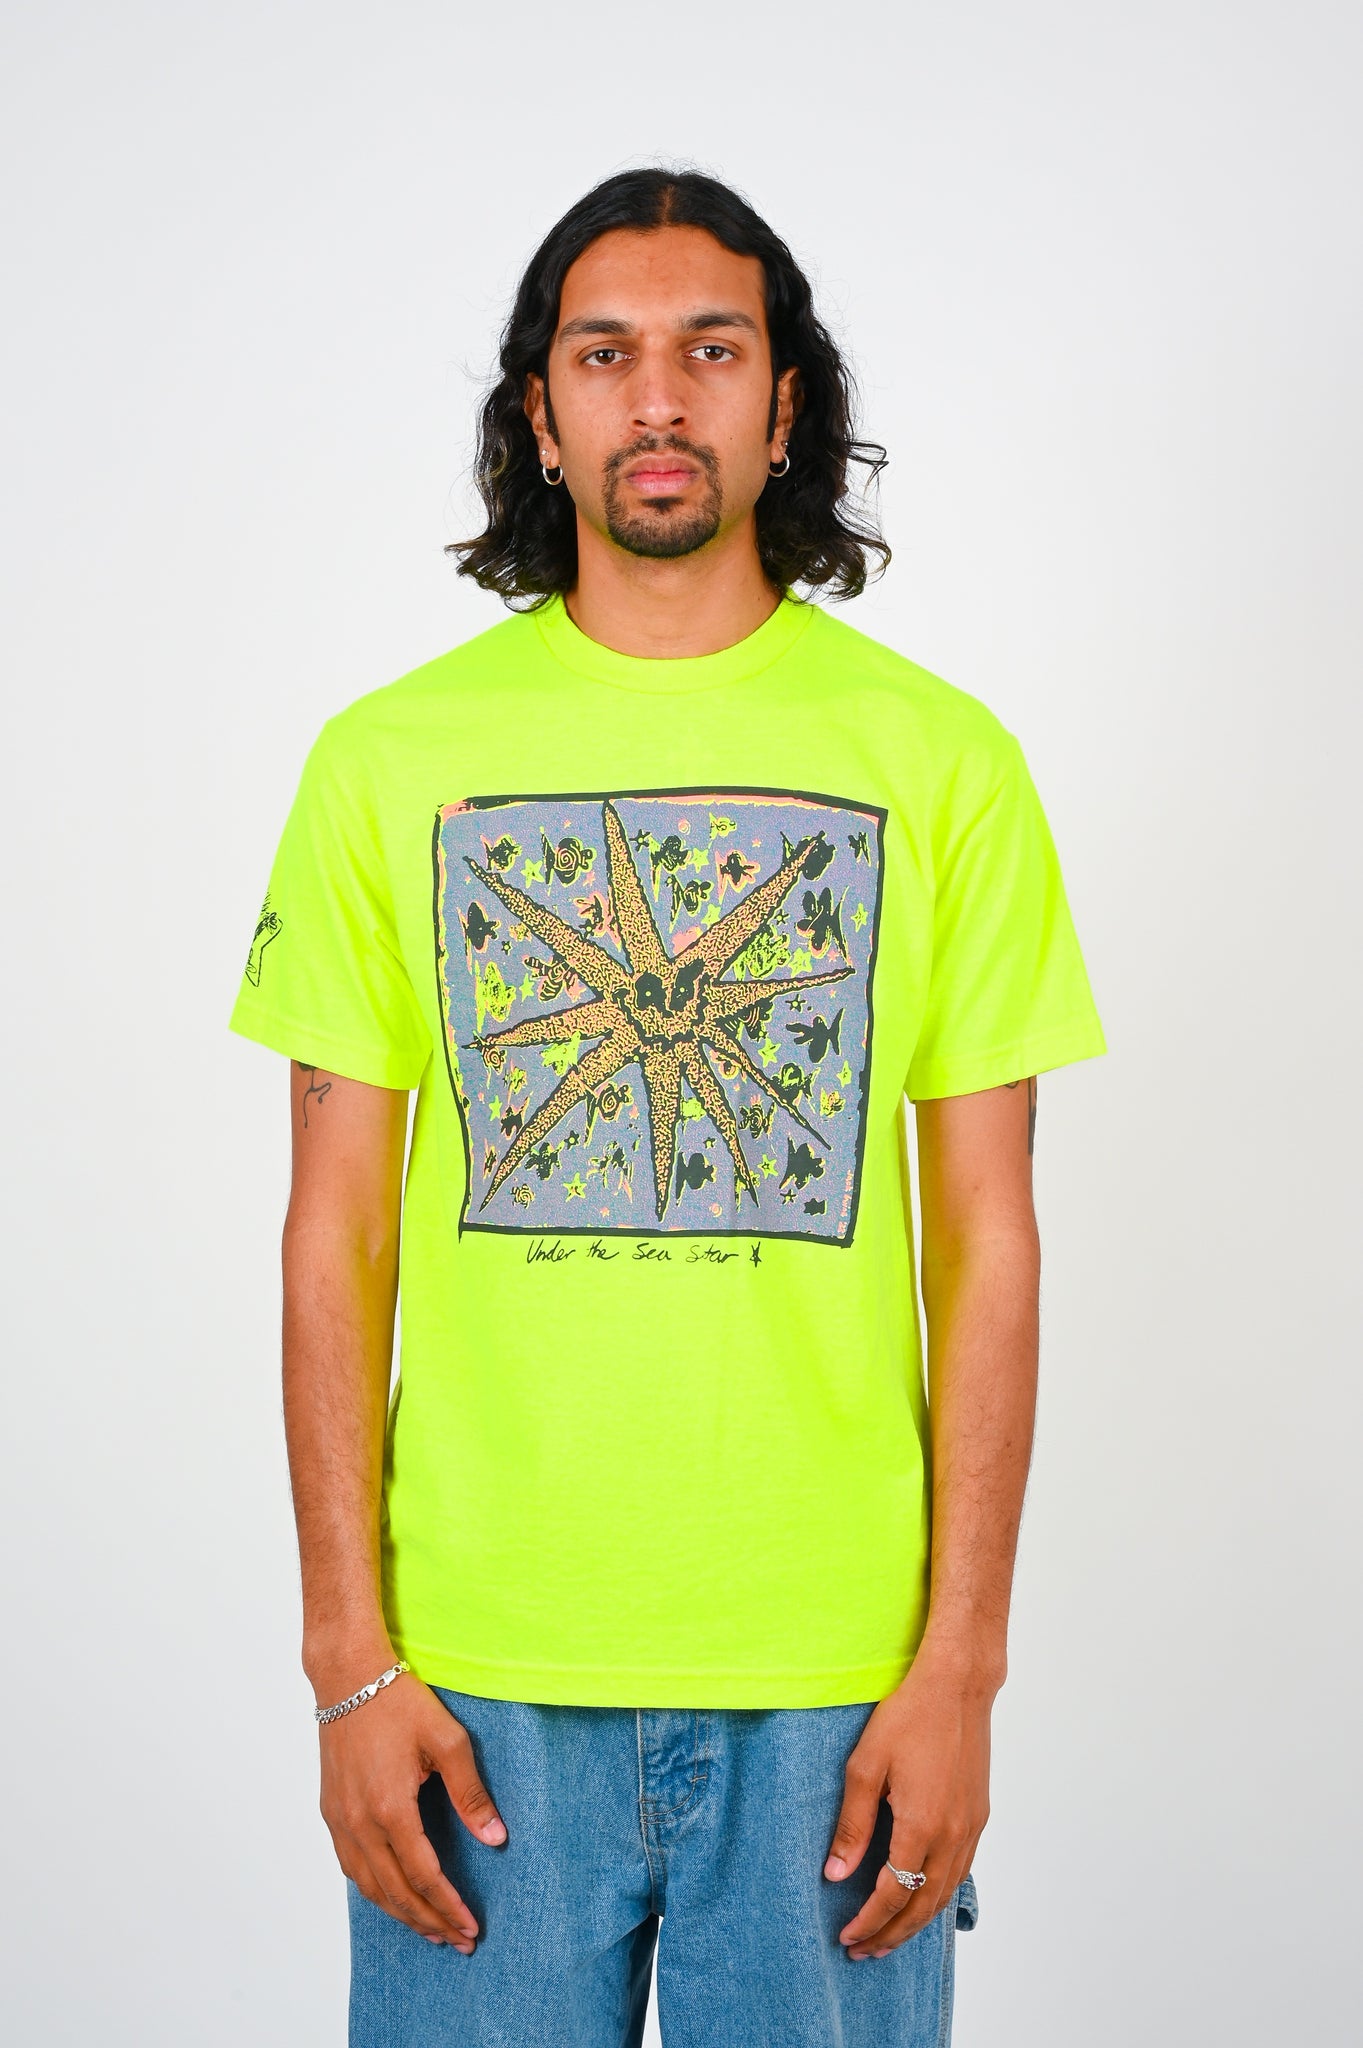 Jack Irvine 'Under The Sea Star' T-Shirt (First Edition)